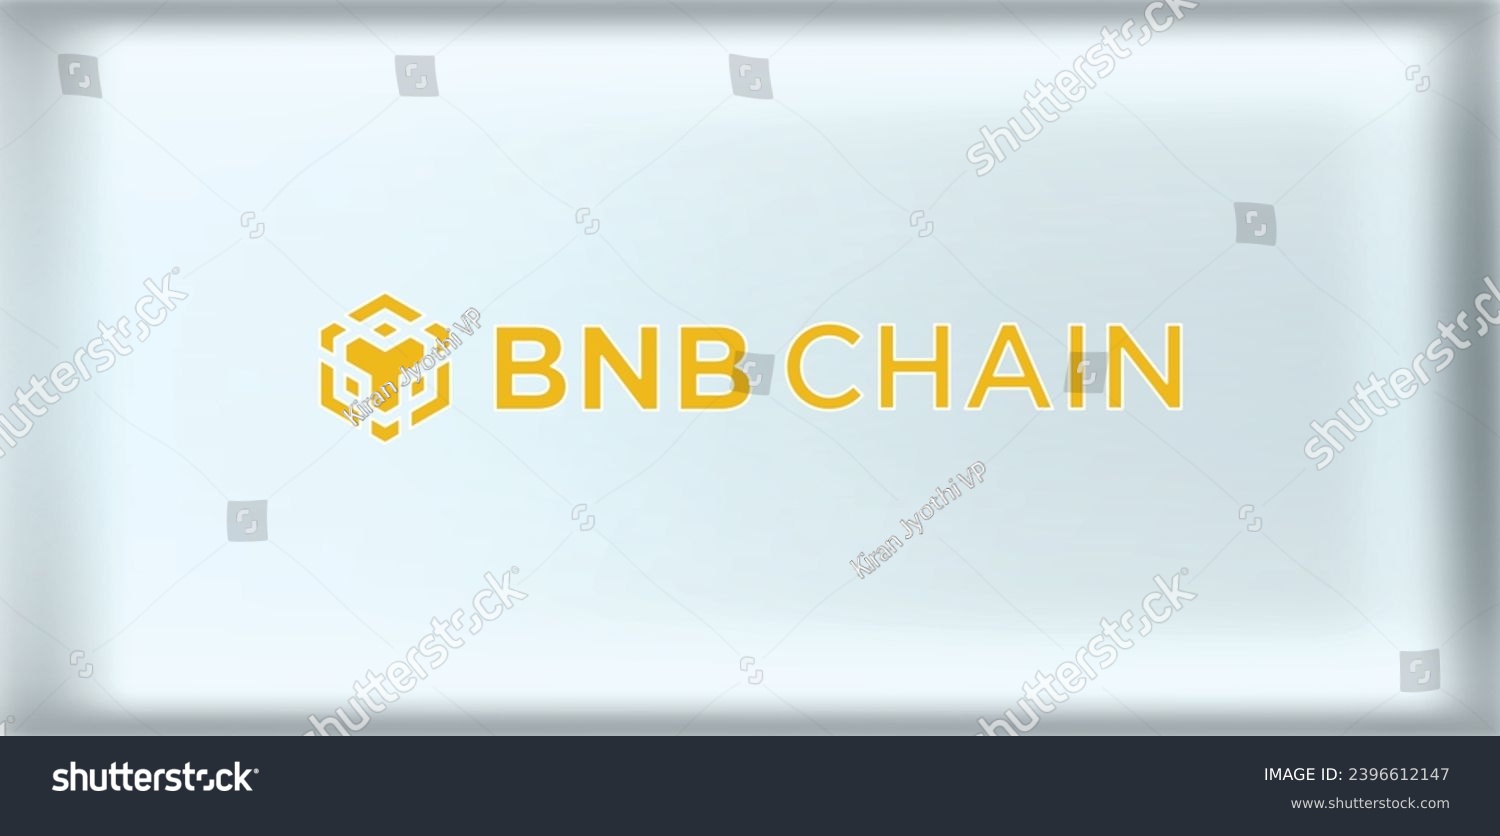 SVG of BNB Chain cryptocurrency logo vector illustration, Decentralized blockchain illustration, branding, websites, mobile apps, and marketing collateral svg